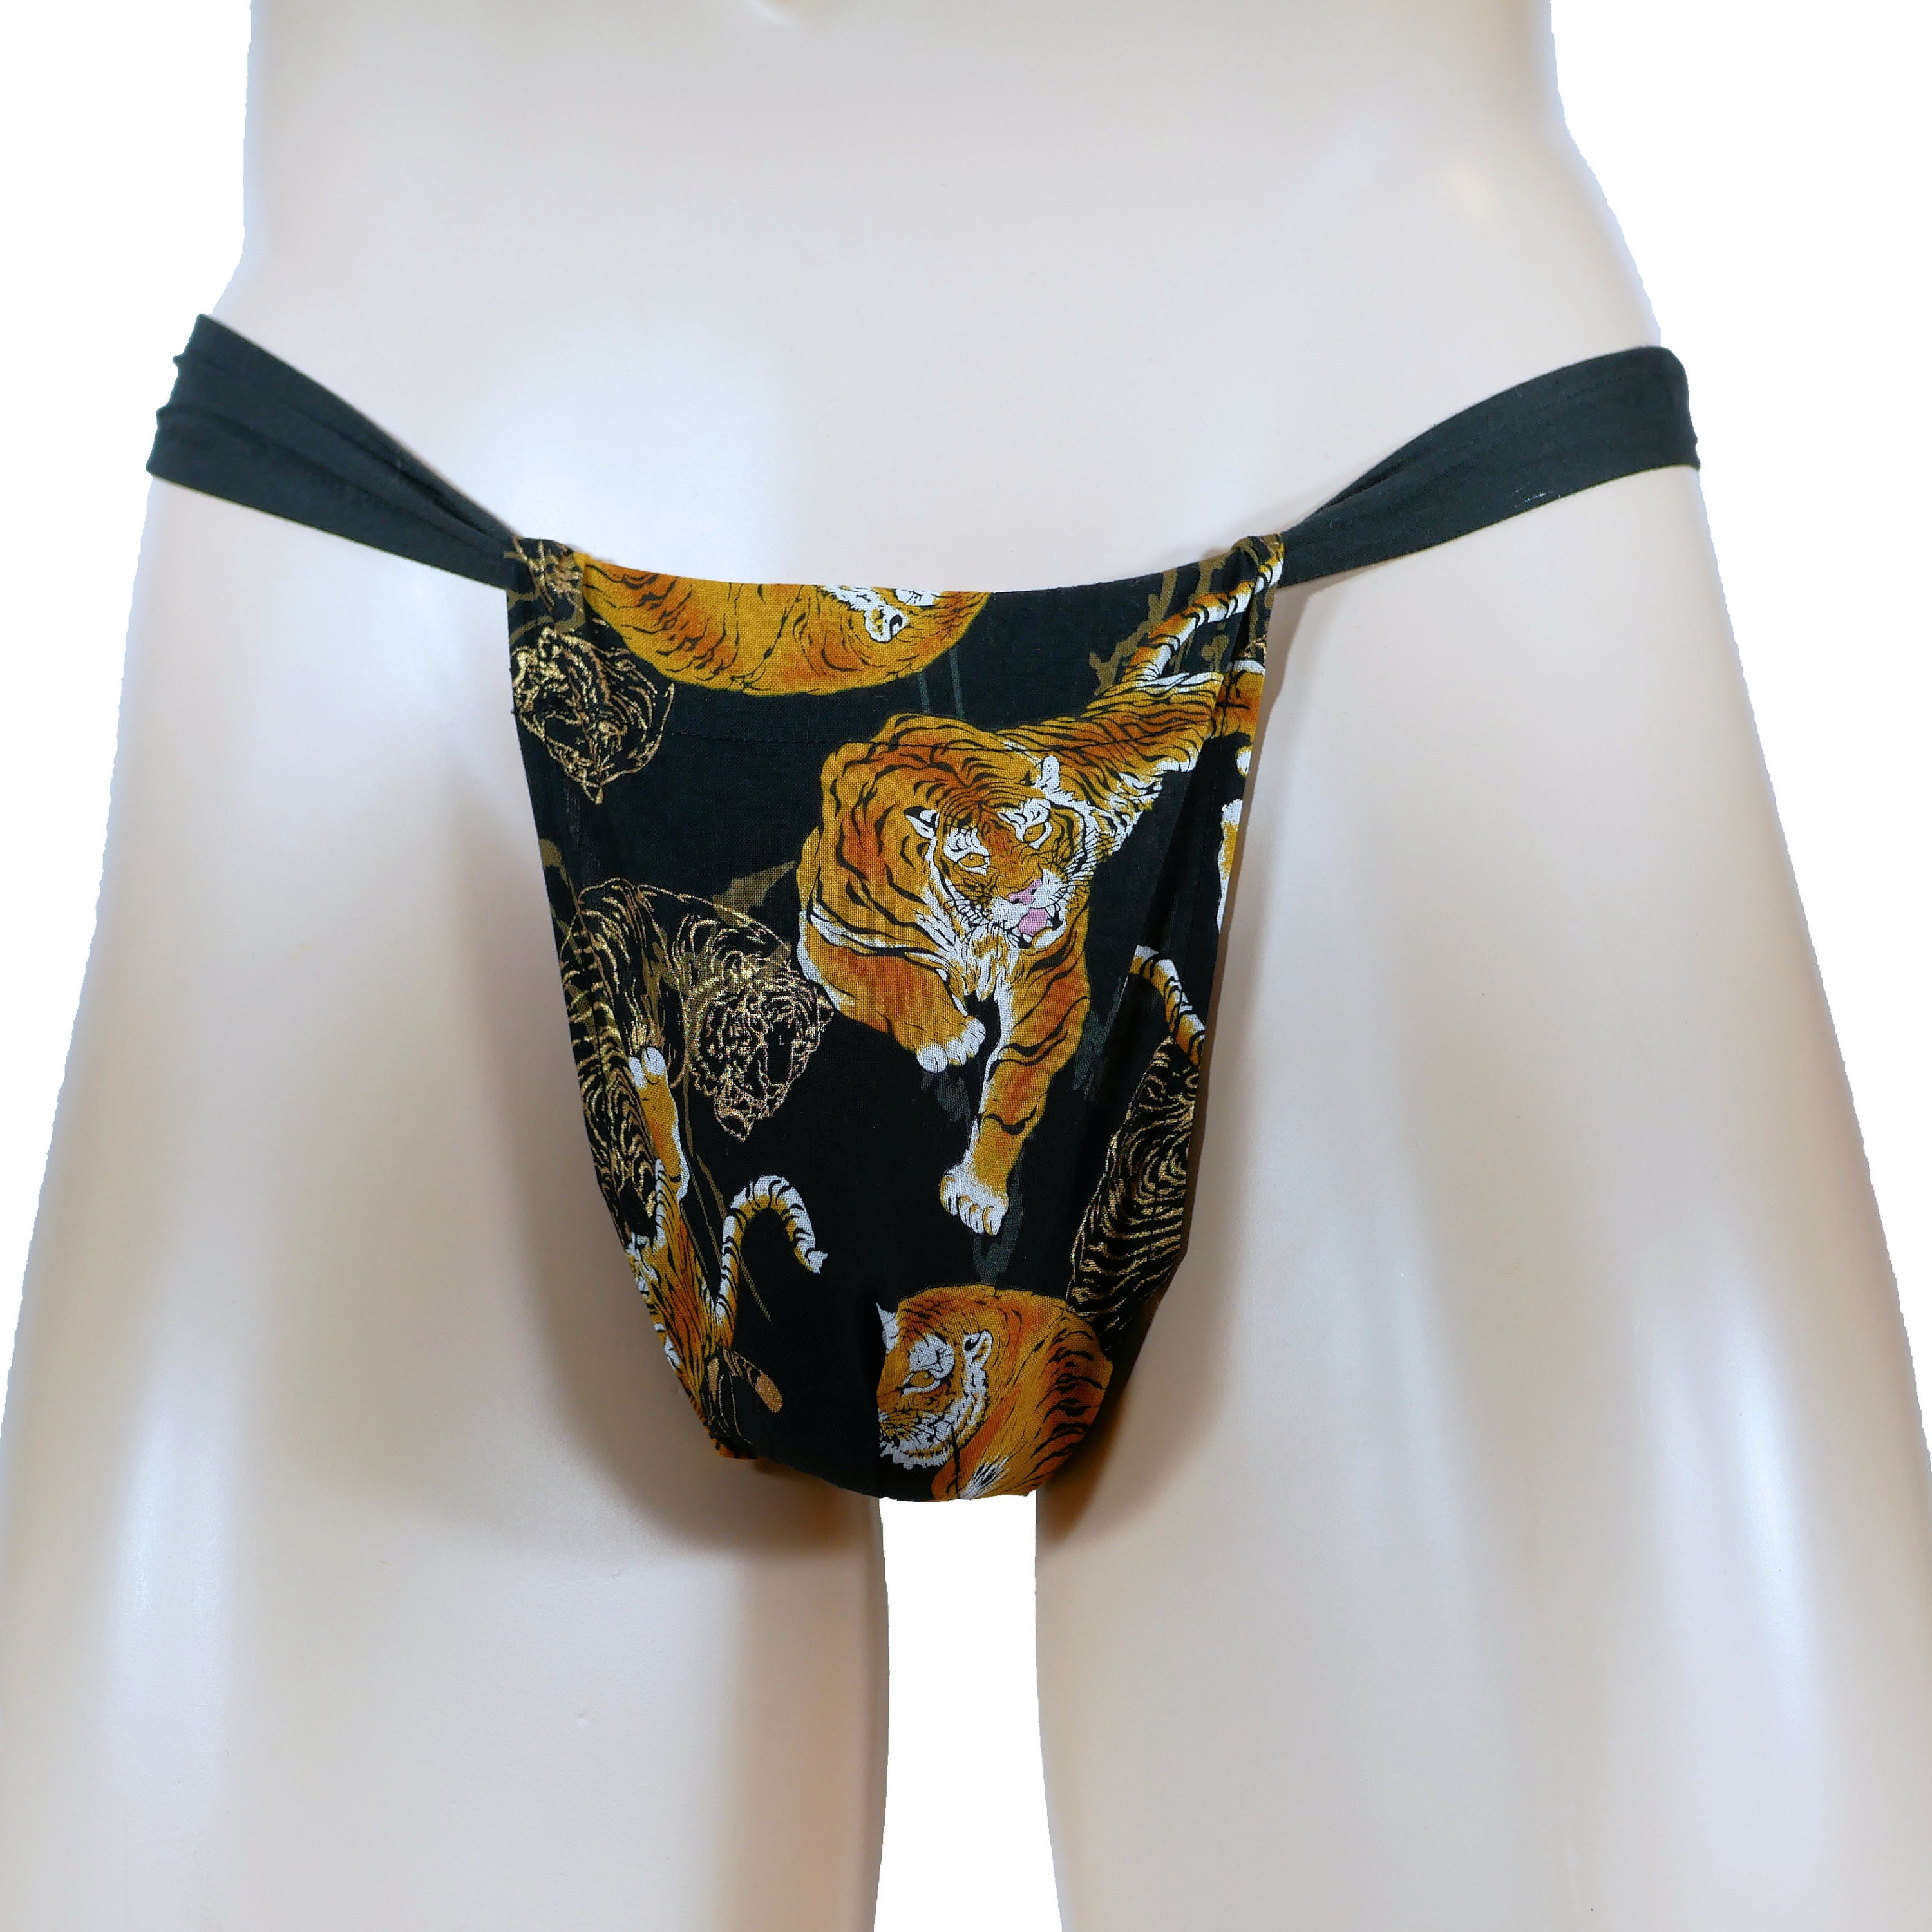 Loincloth revival continues with luxury silk fundoshi lingerie for men and  women